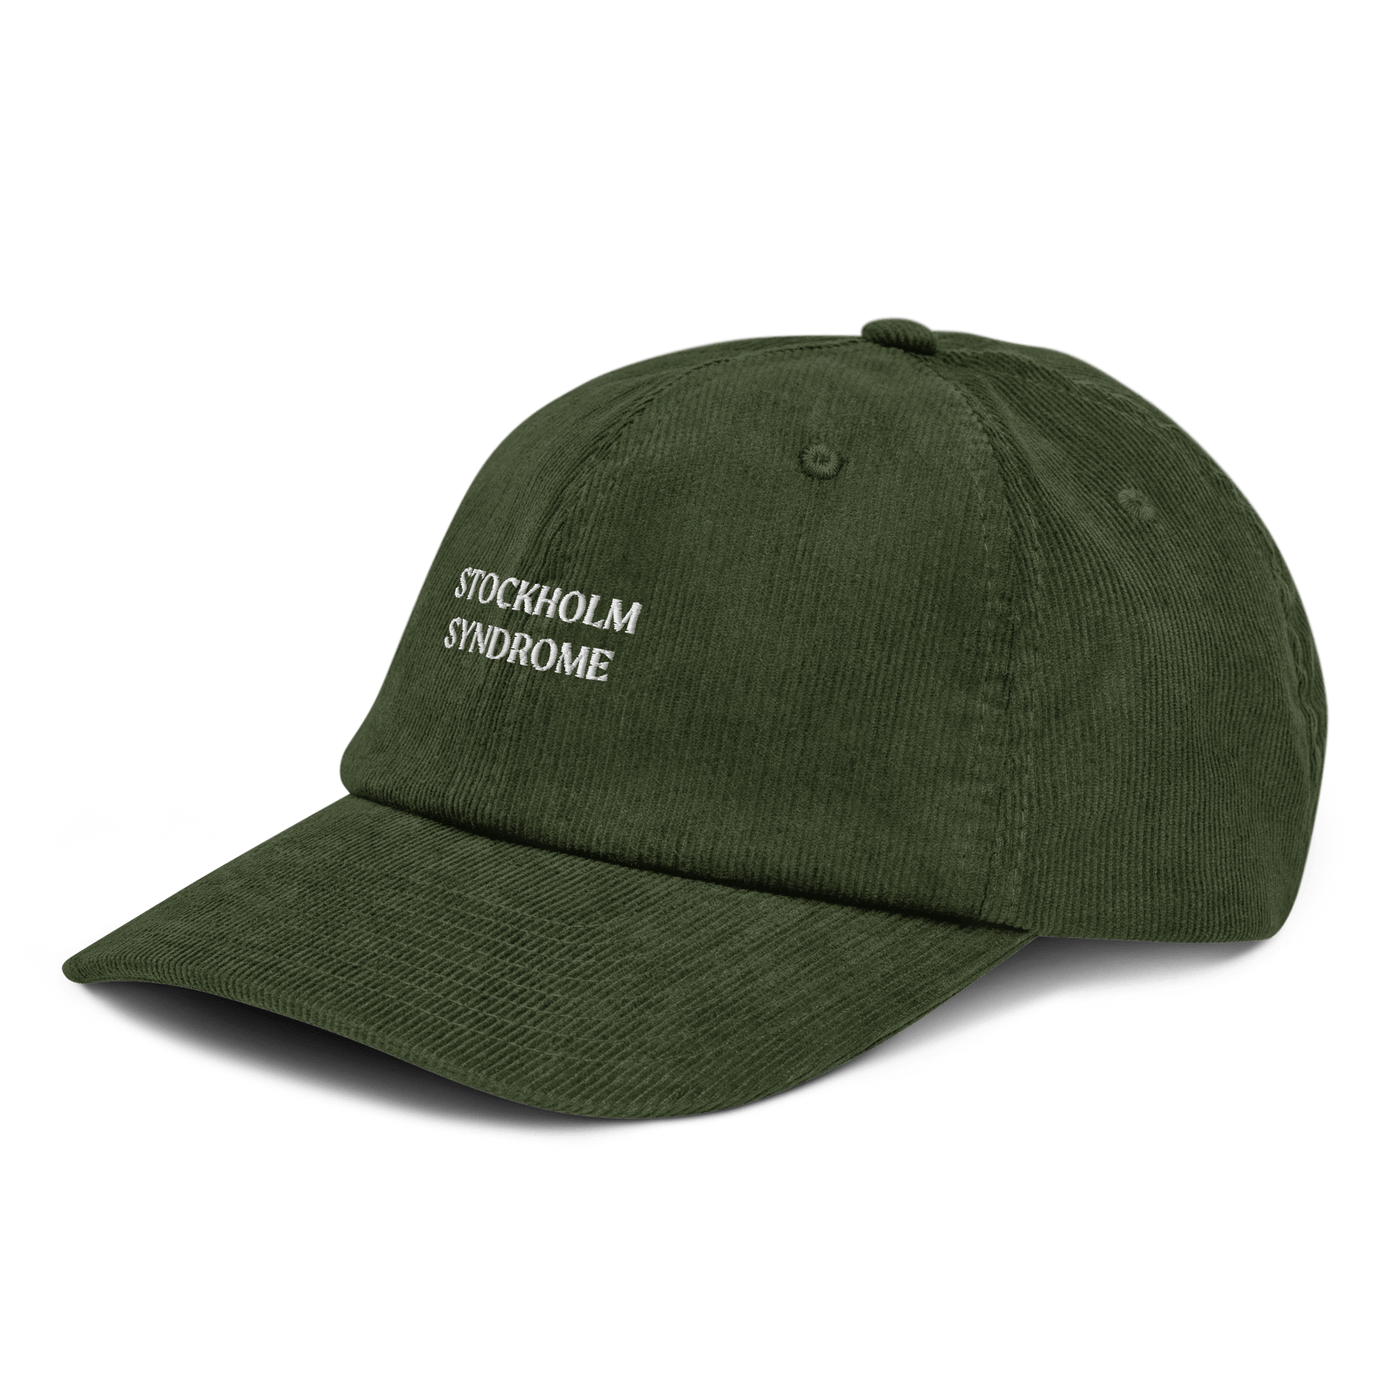 Stockholm Syndrome Corduroy hat - Dark Olive - - Just Another Cap Store